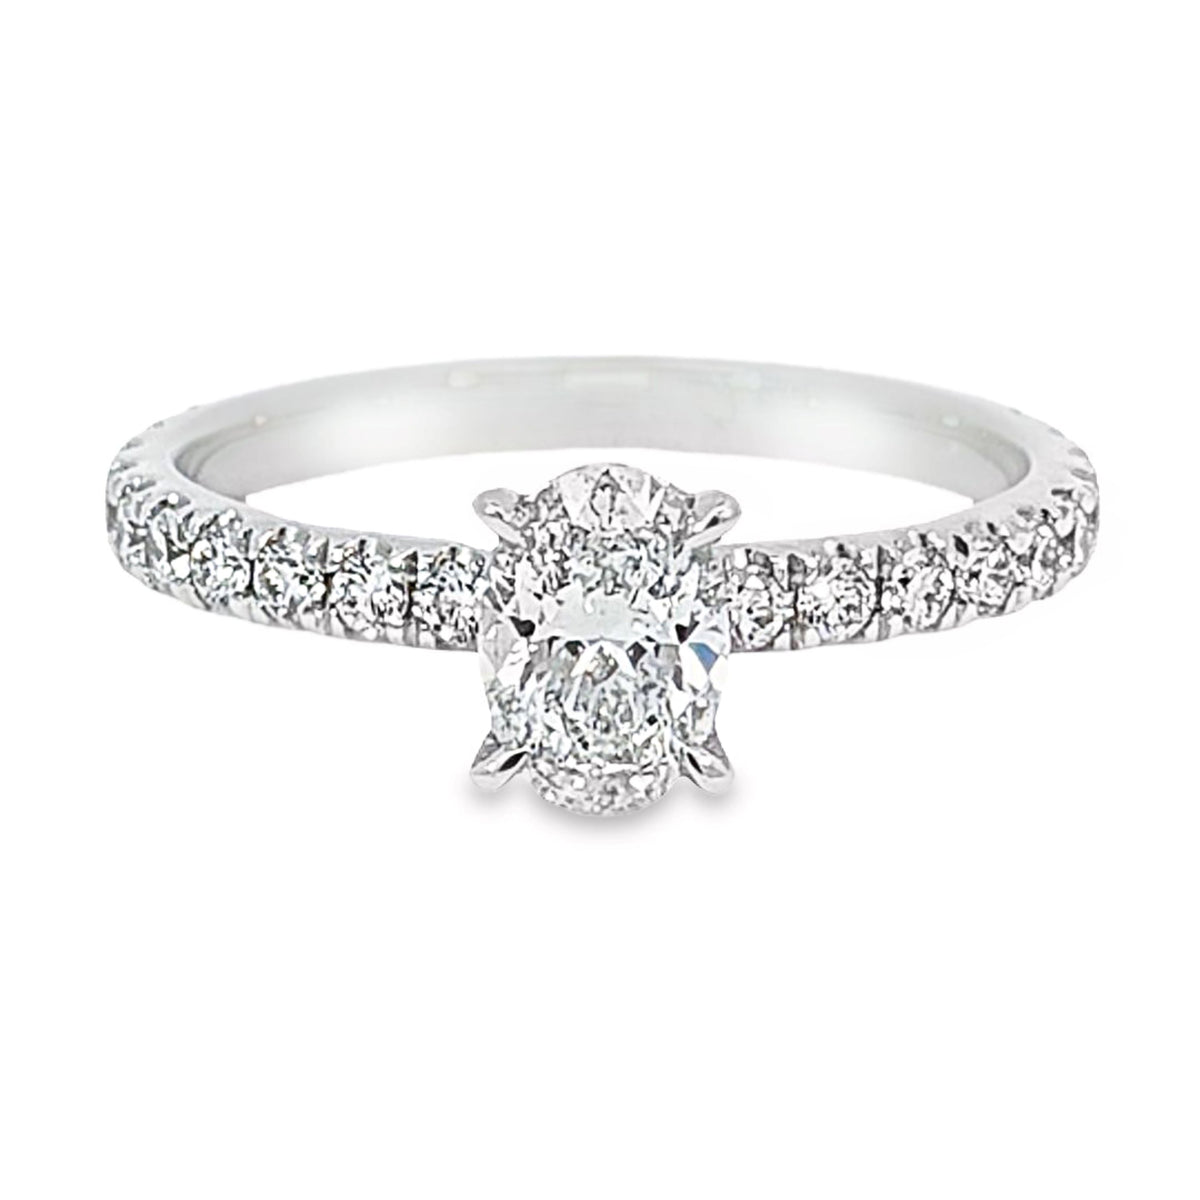 Evie 18ct White Gold Diamond Solitaire Ring with Diamond Set Band 0.70ct D/SI2